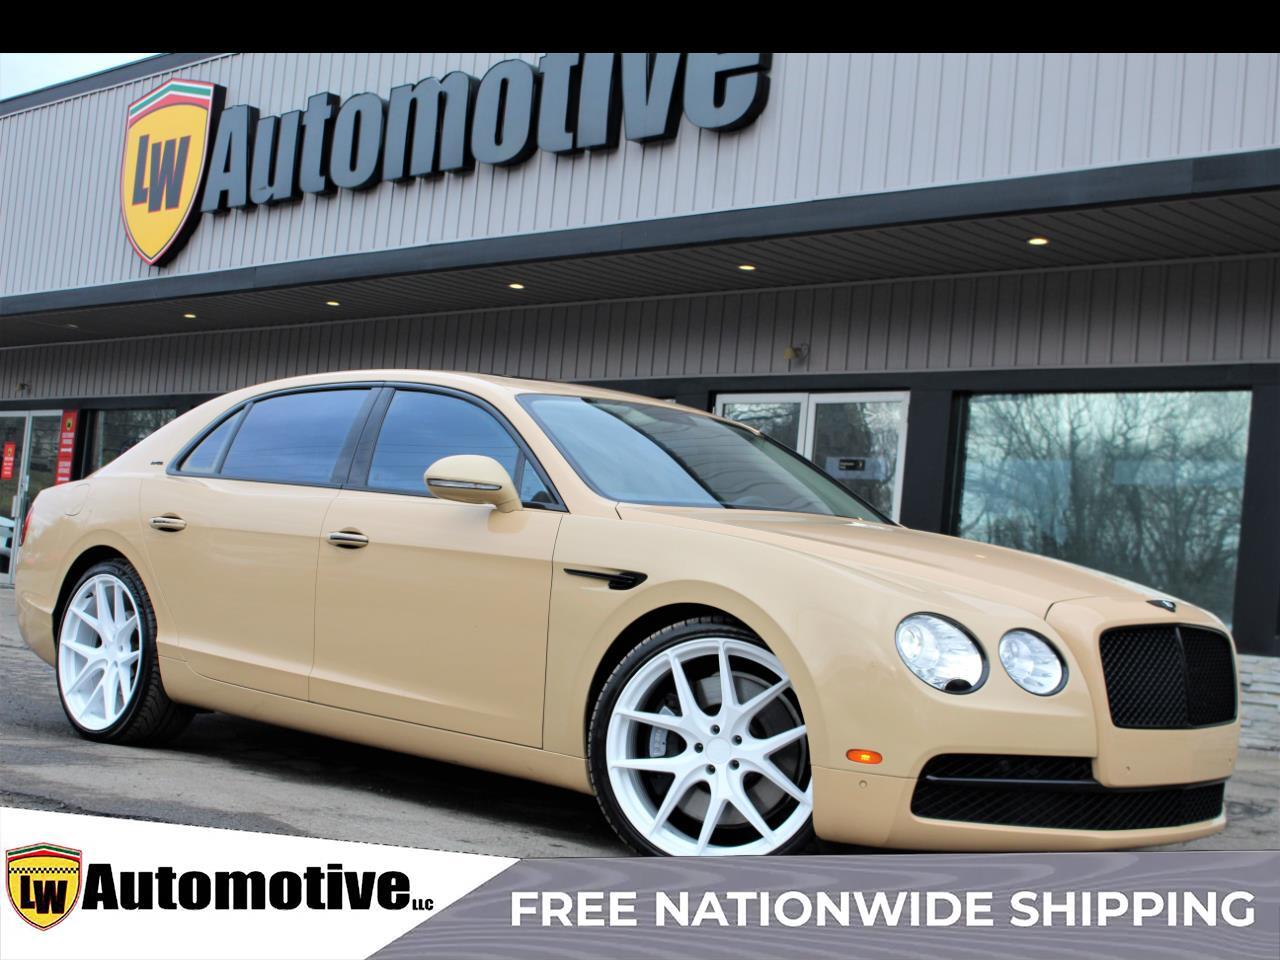 2015 Bentley Flying Spur 4dr Sdn W12